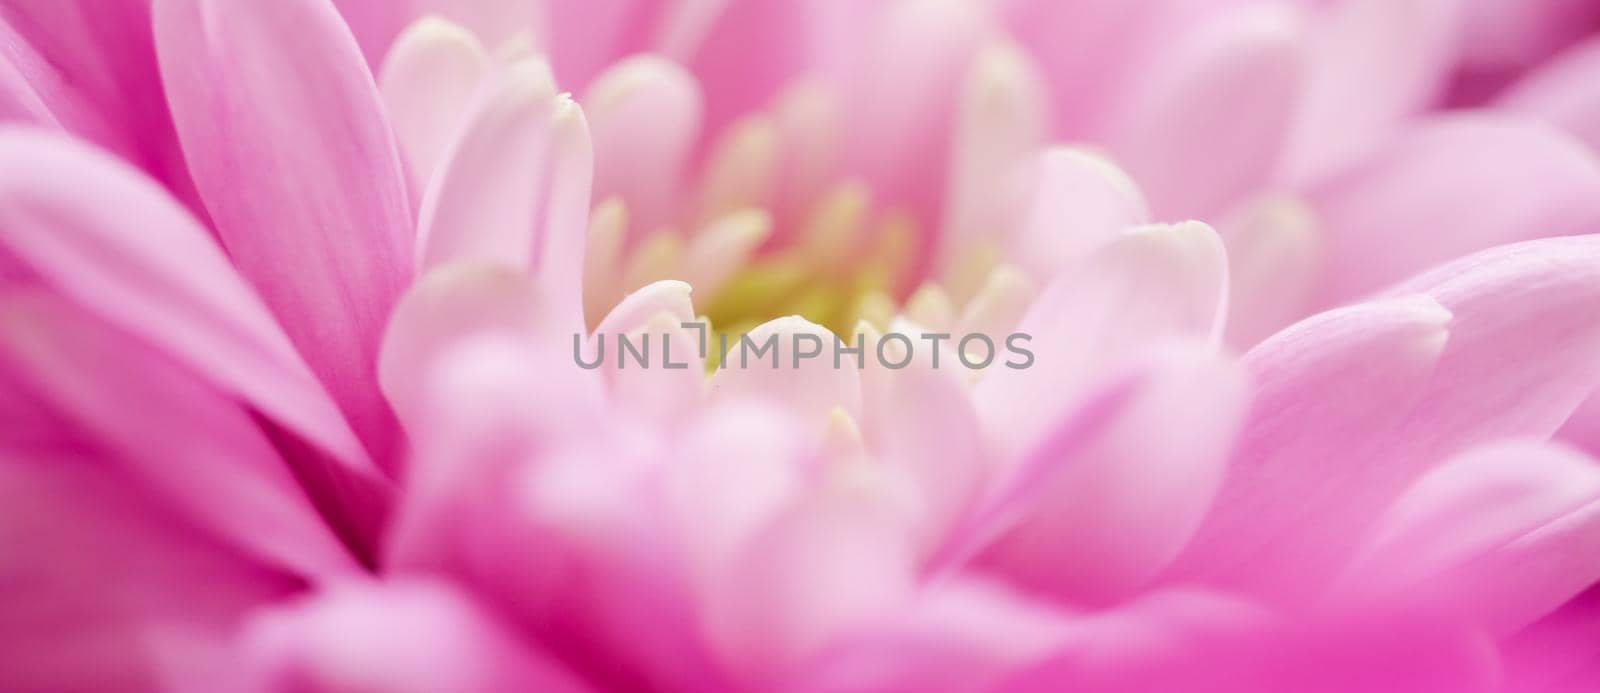 Pink daisy flower petals in bloom, abstract floral blossom art background, flowers in spring nature for perfume scent, wedding, luxury beauty brand holiday design by Anneleven